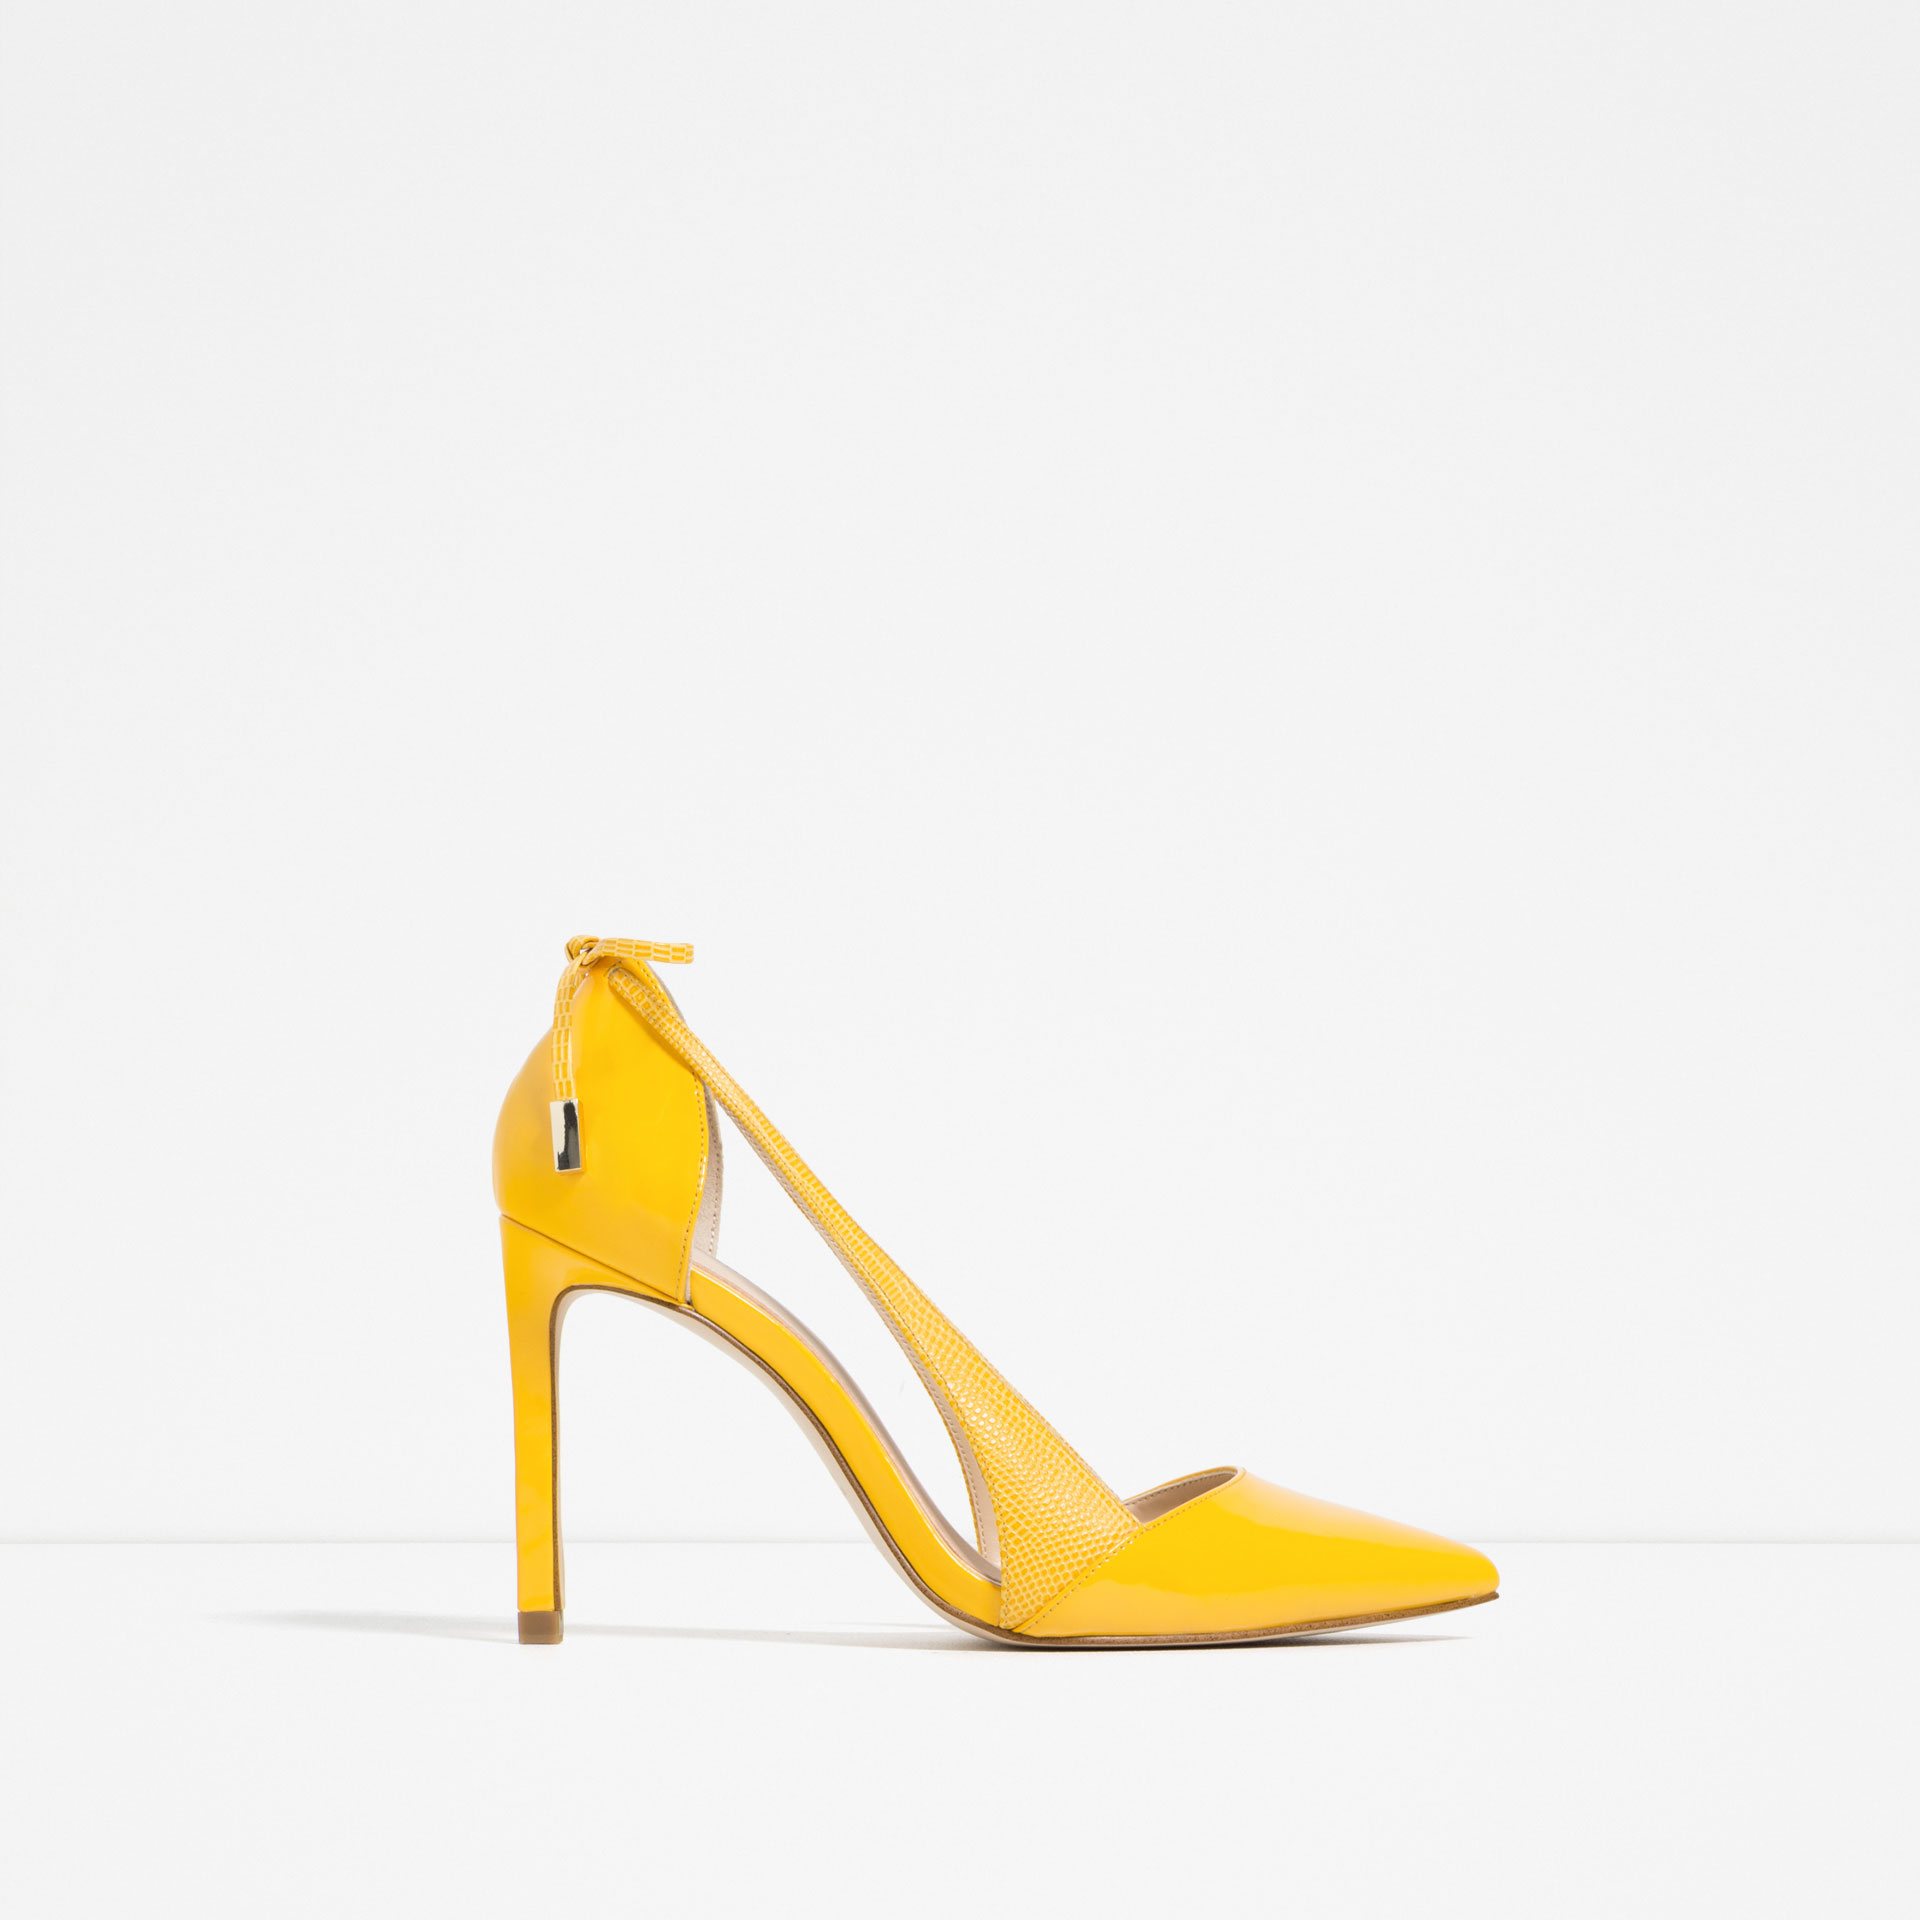 Zara High Heel Shoes With Bow in Yellow | Lyst